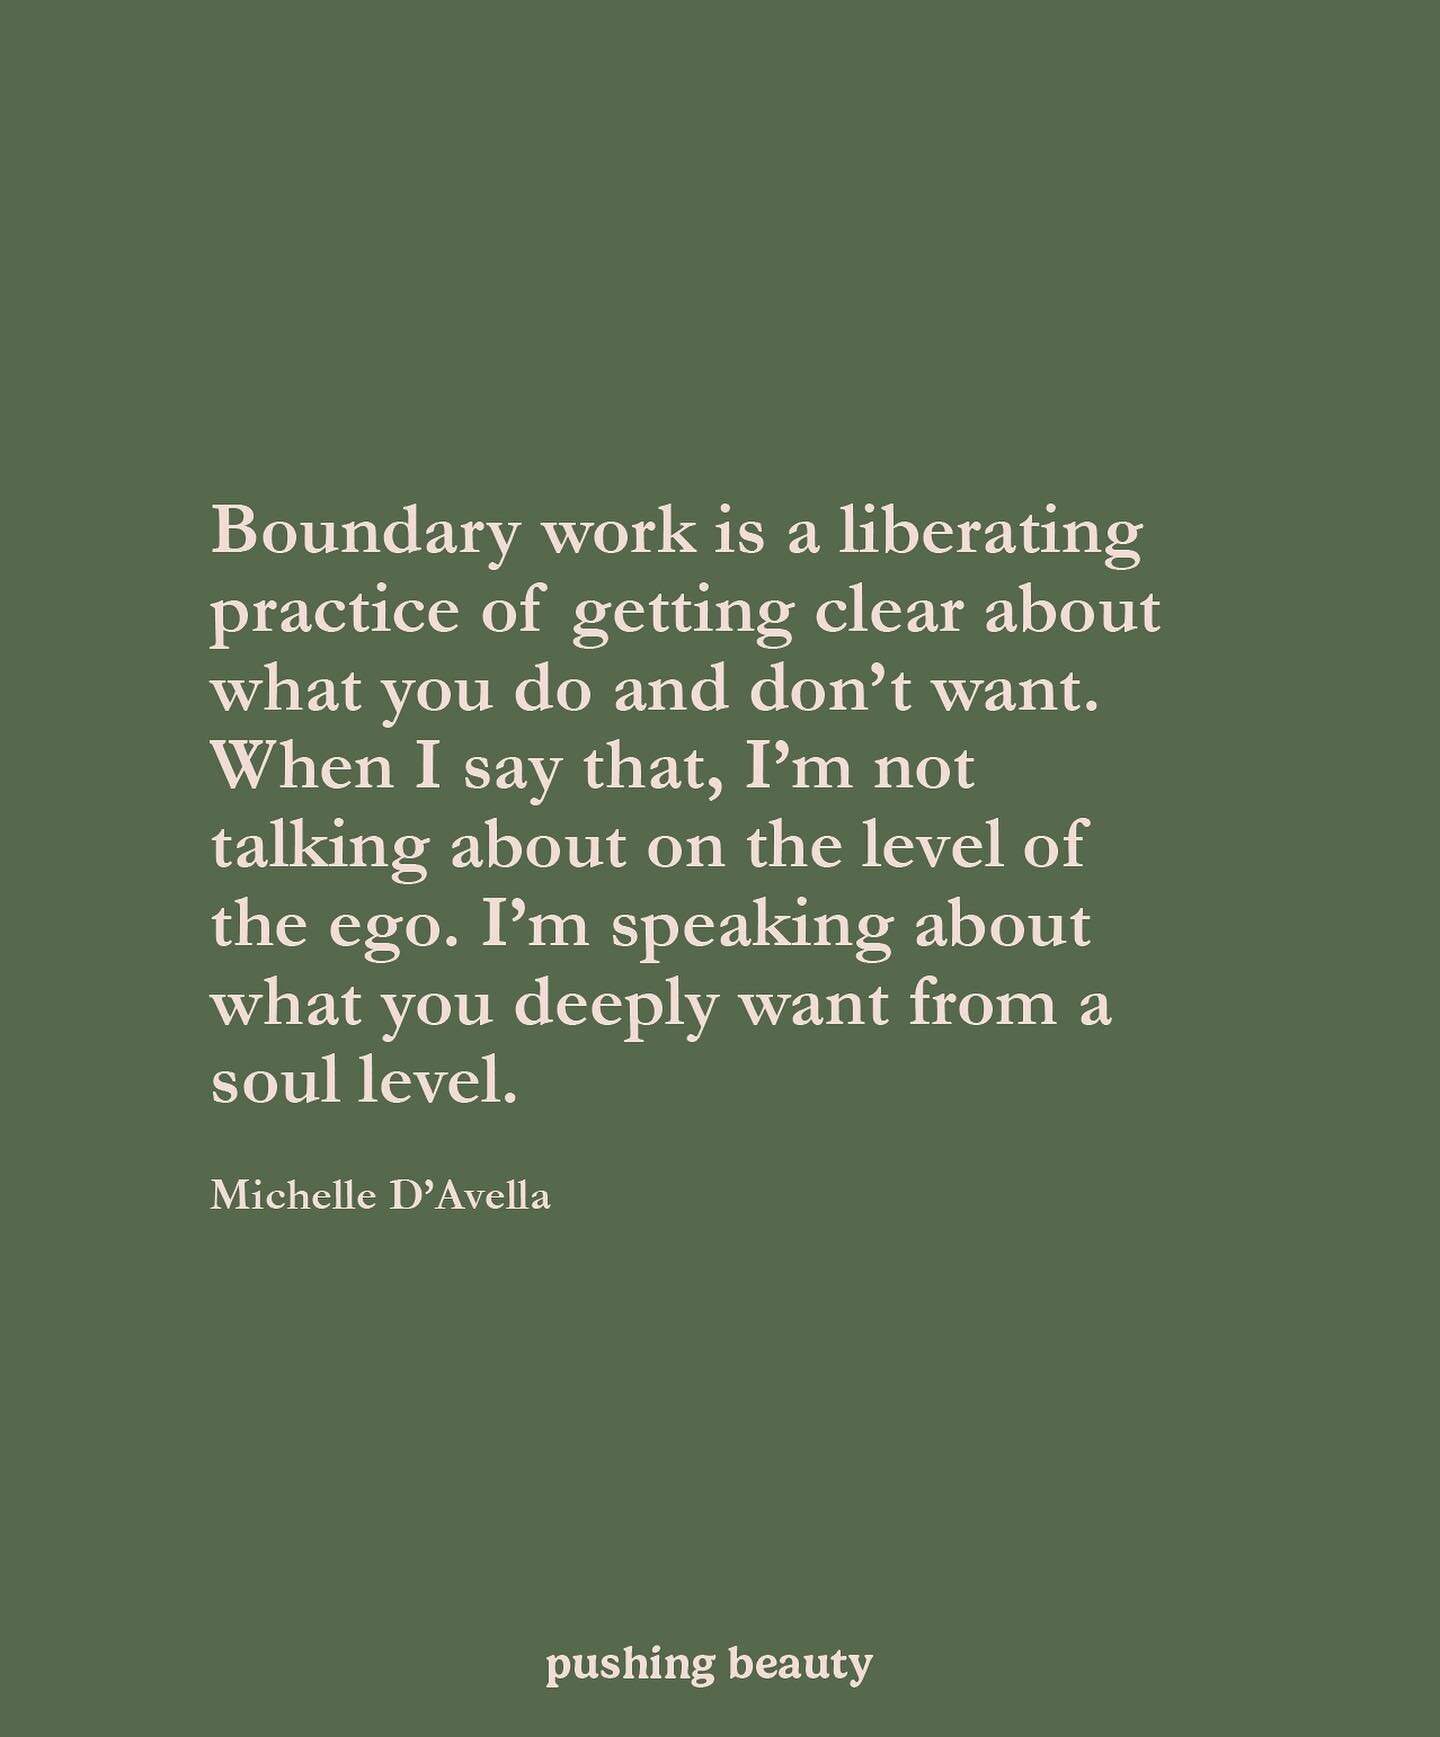 Boundary work is a liberating practice of getting clear about what you do and don&rsquo;t want. When I say that, I&rsquo;m not talking about on the level of the ego. I&rsquo;m speaking about what you deeply want from a soul level. This is the pure en